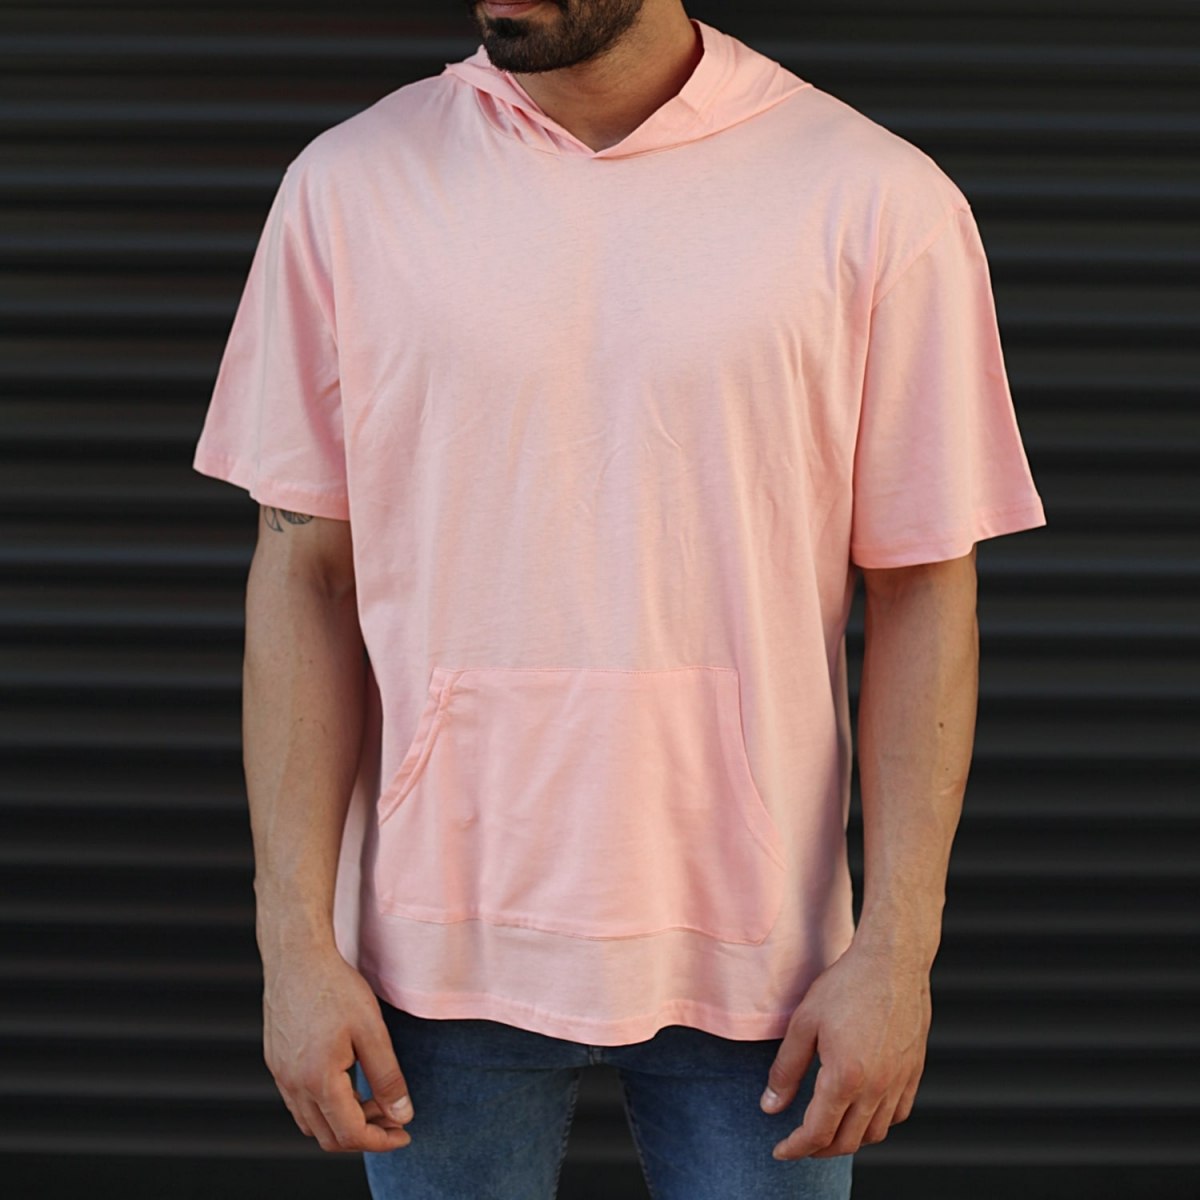 Men's Hooded Short Sleeve T-Shirt With Pockets Pink - 1